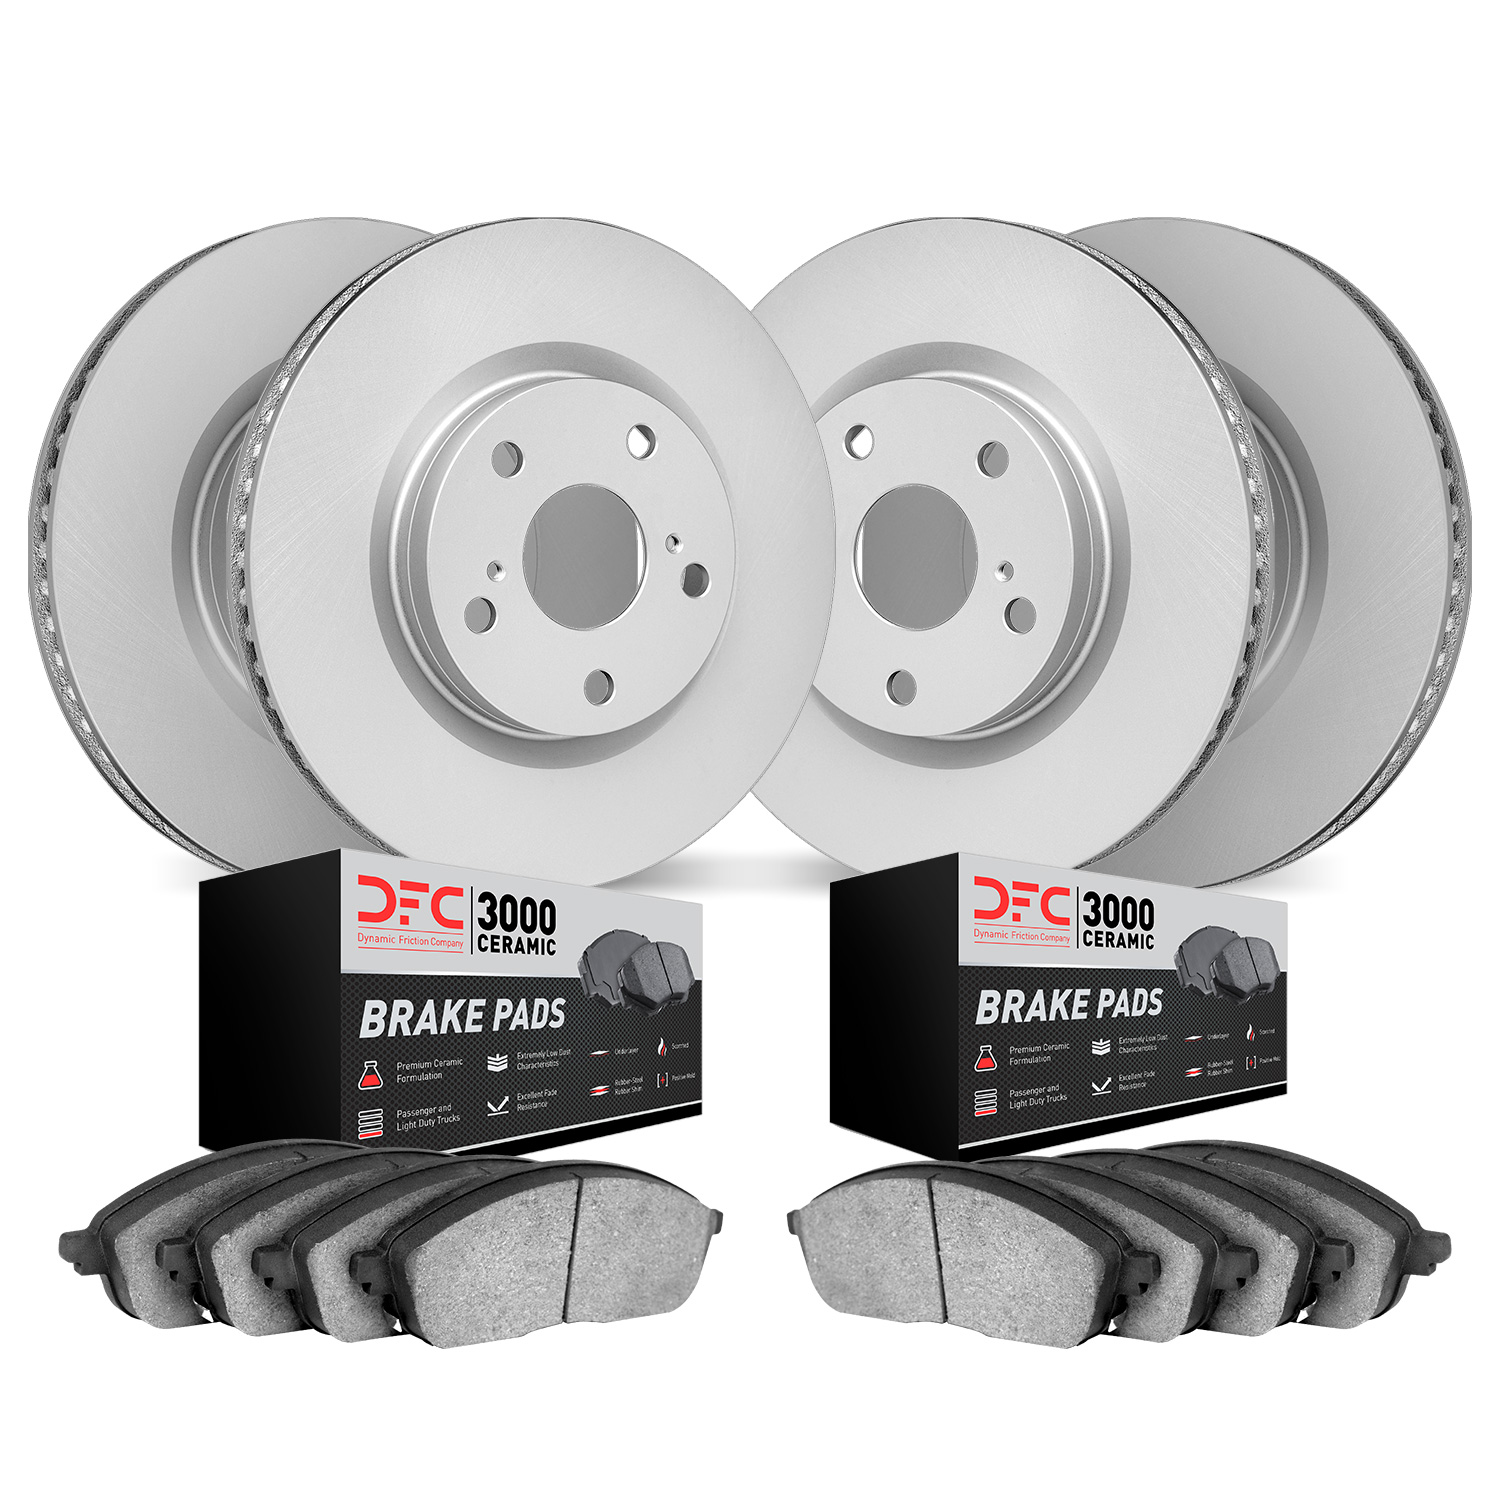 4304-31061 Geospec Brake Rotors with 3000-Series Ceramic Brake Pads Kit, 2013-2013 BMW, Position: Front and Rear